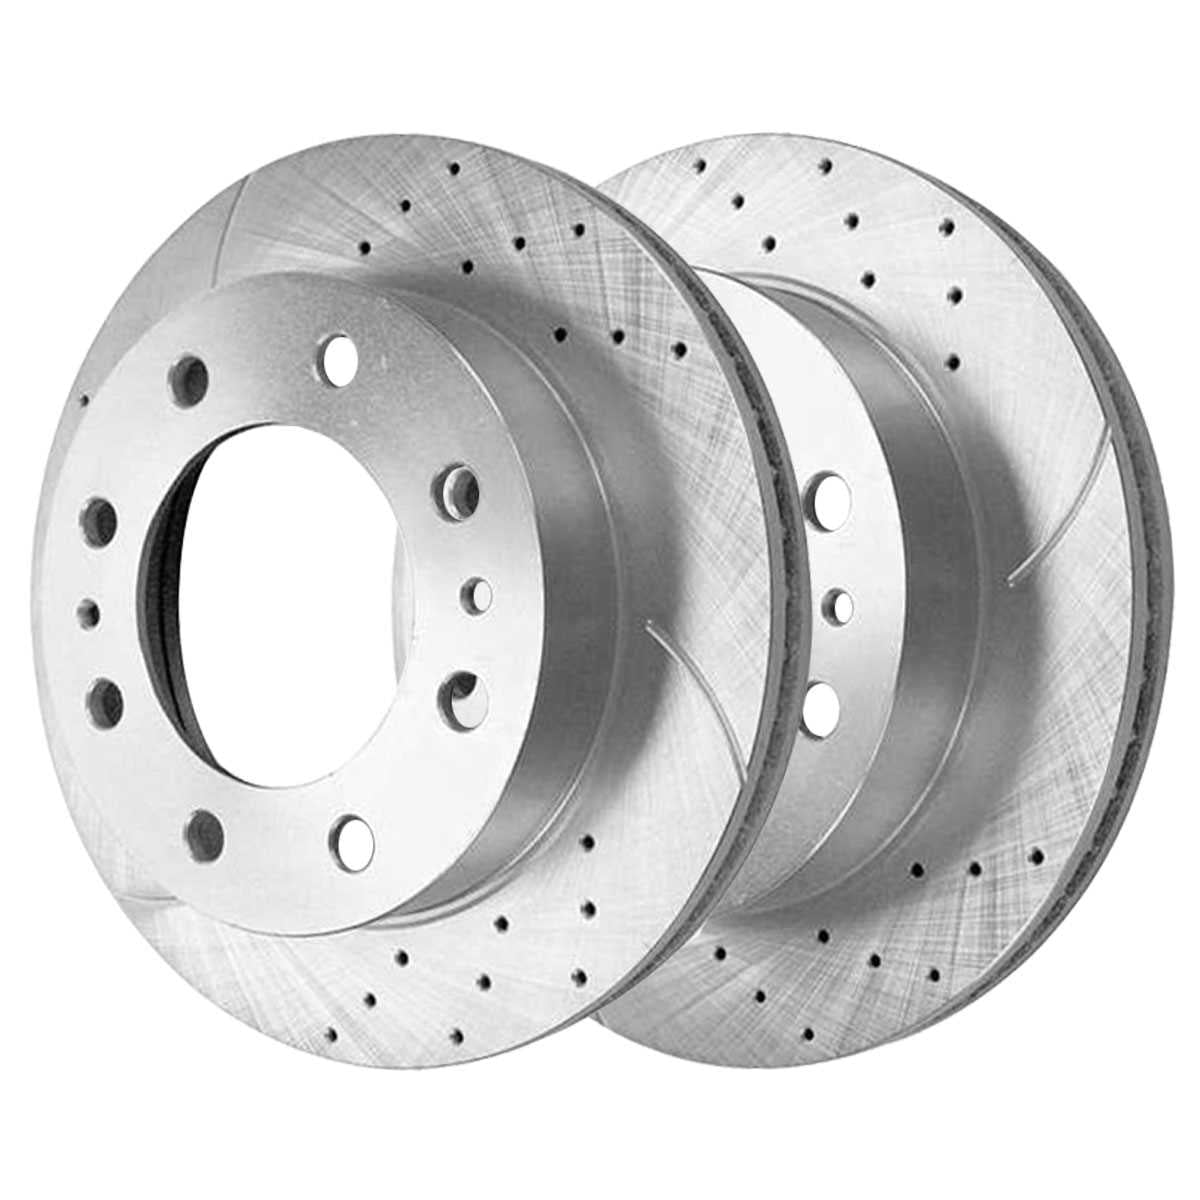 For SRW CHEVY 86mm FRONT & REAR DRILLED AND SLOTTED PERFORMANCE BRAKE Rotors